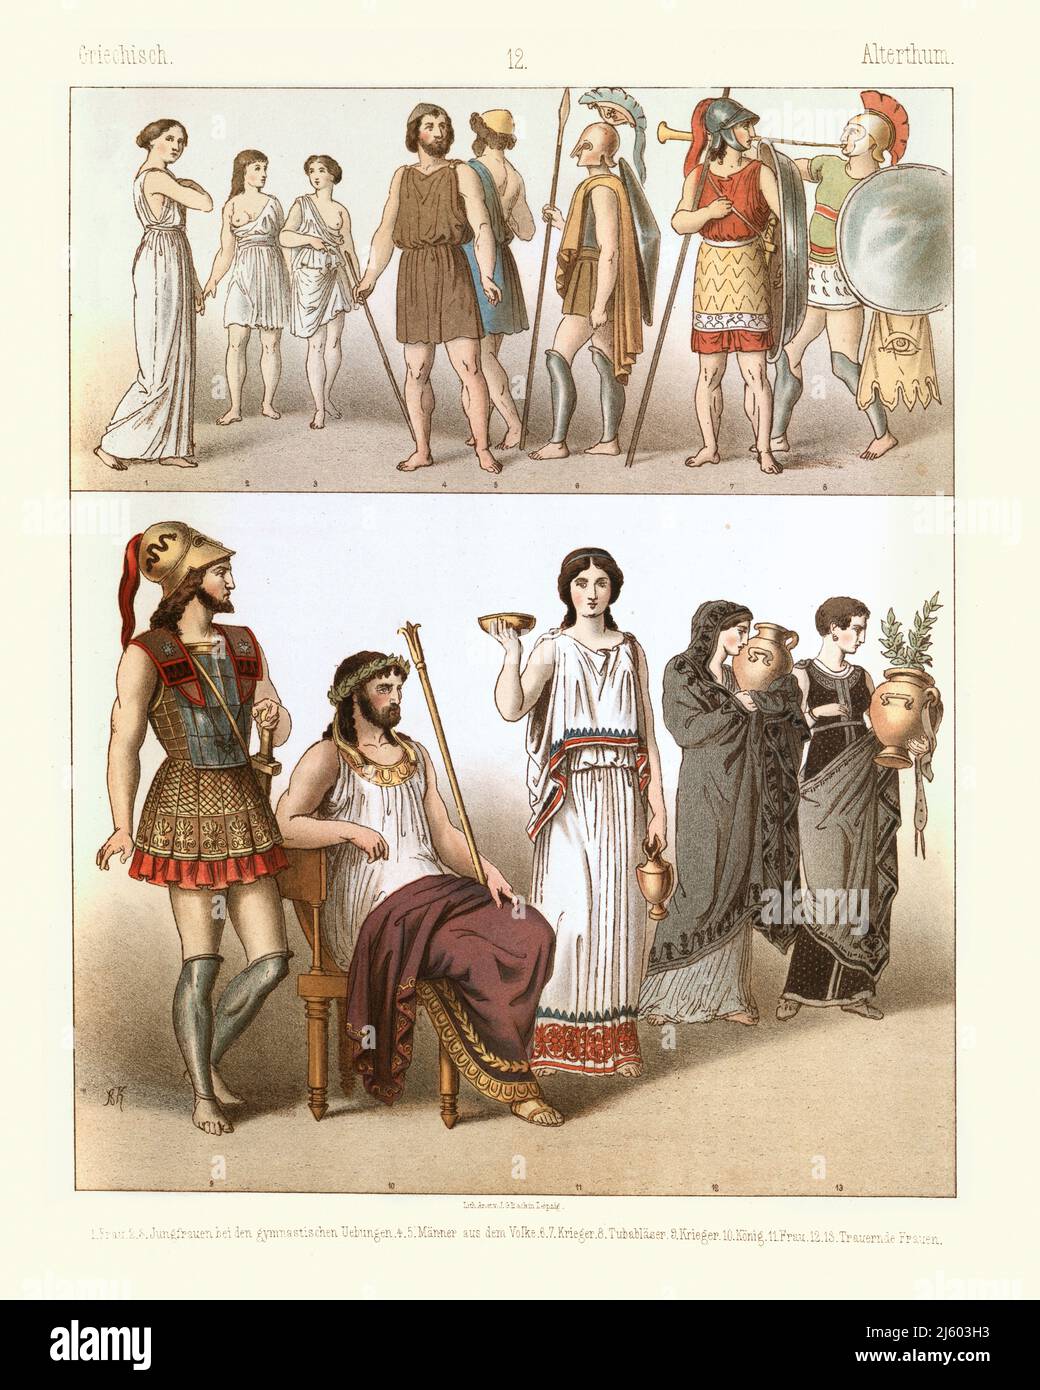 Costumes and fashions of Ancient Greece, Greek woman, soliders, king, History of fashion Stock Photo